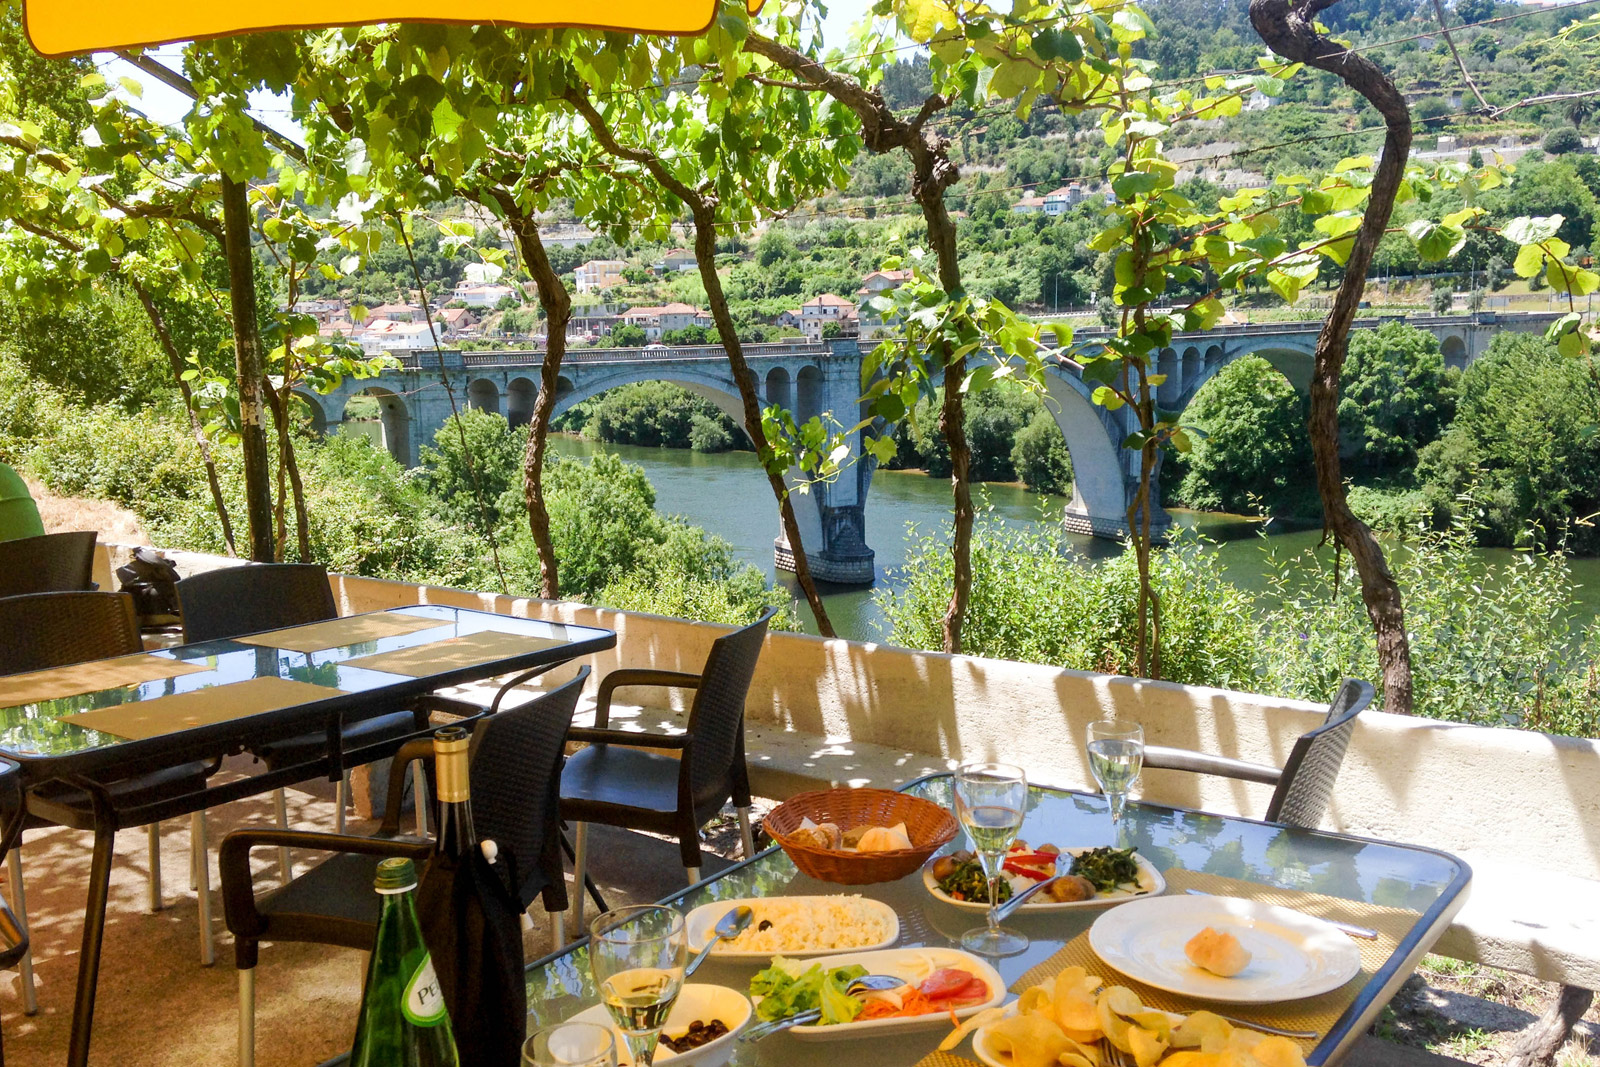 Lunch at a lovely outdoor restaurant we came upon while driving around the Douro River Valley